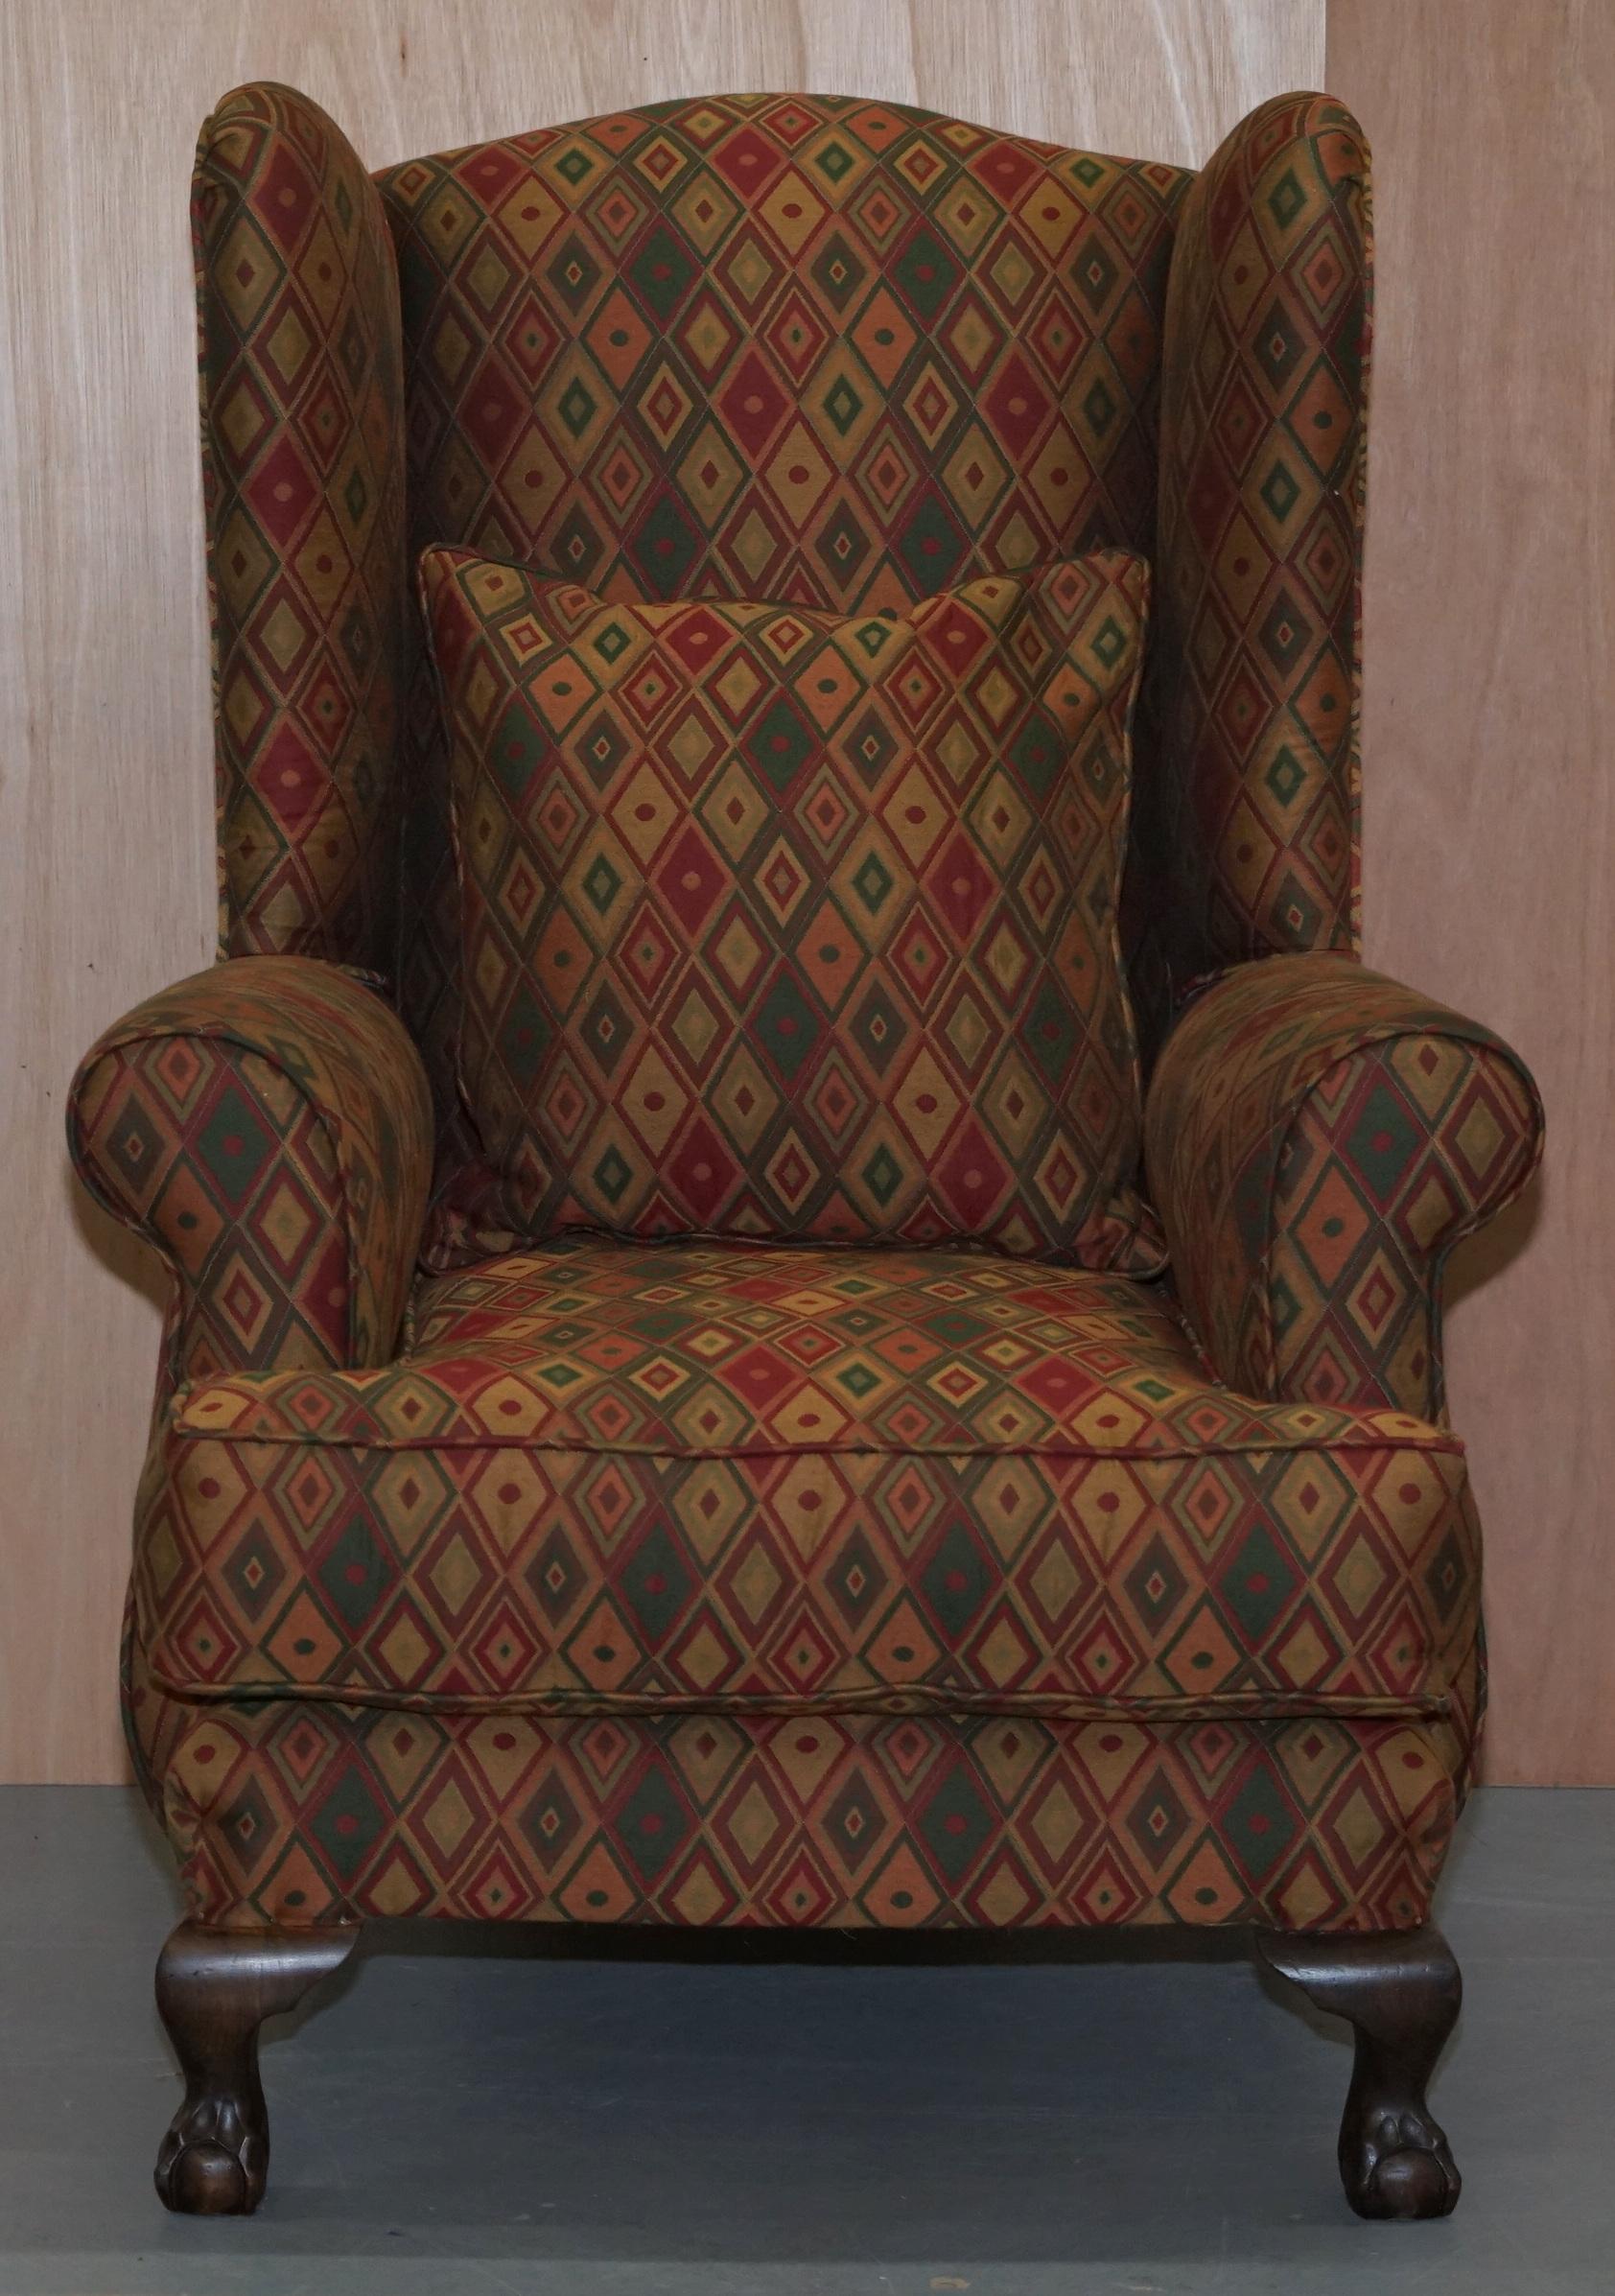 We are delighted to offer for sale this lovely Kilim style upholstery wingback armchair in good vintage condition throughout 

A well made and decorative armchair which is very comfortable, the upholstery is Kilim style as mentioned which is just